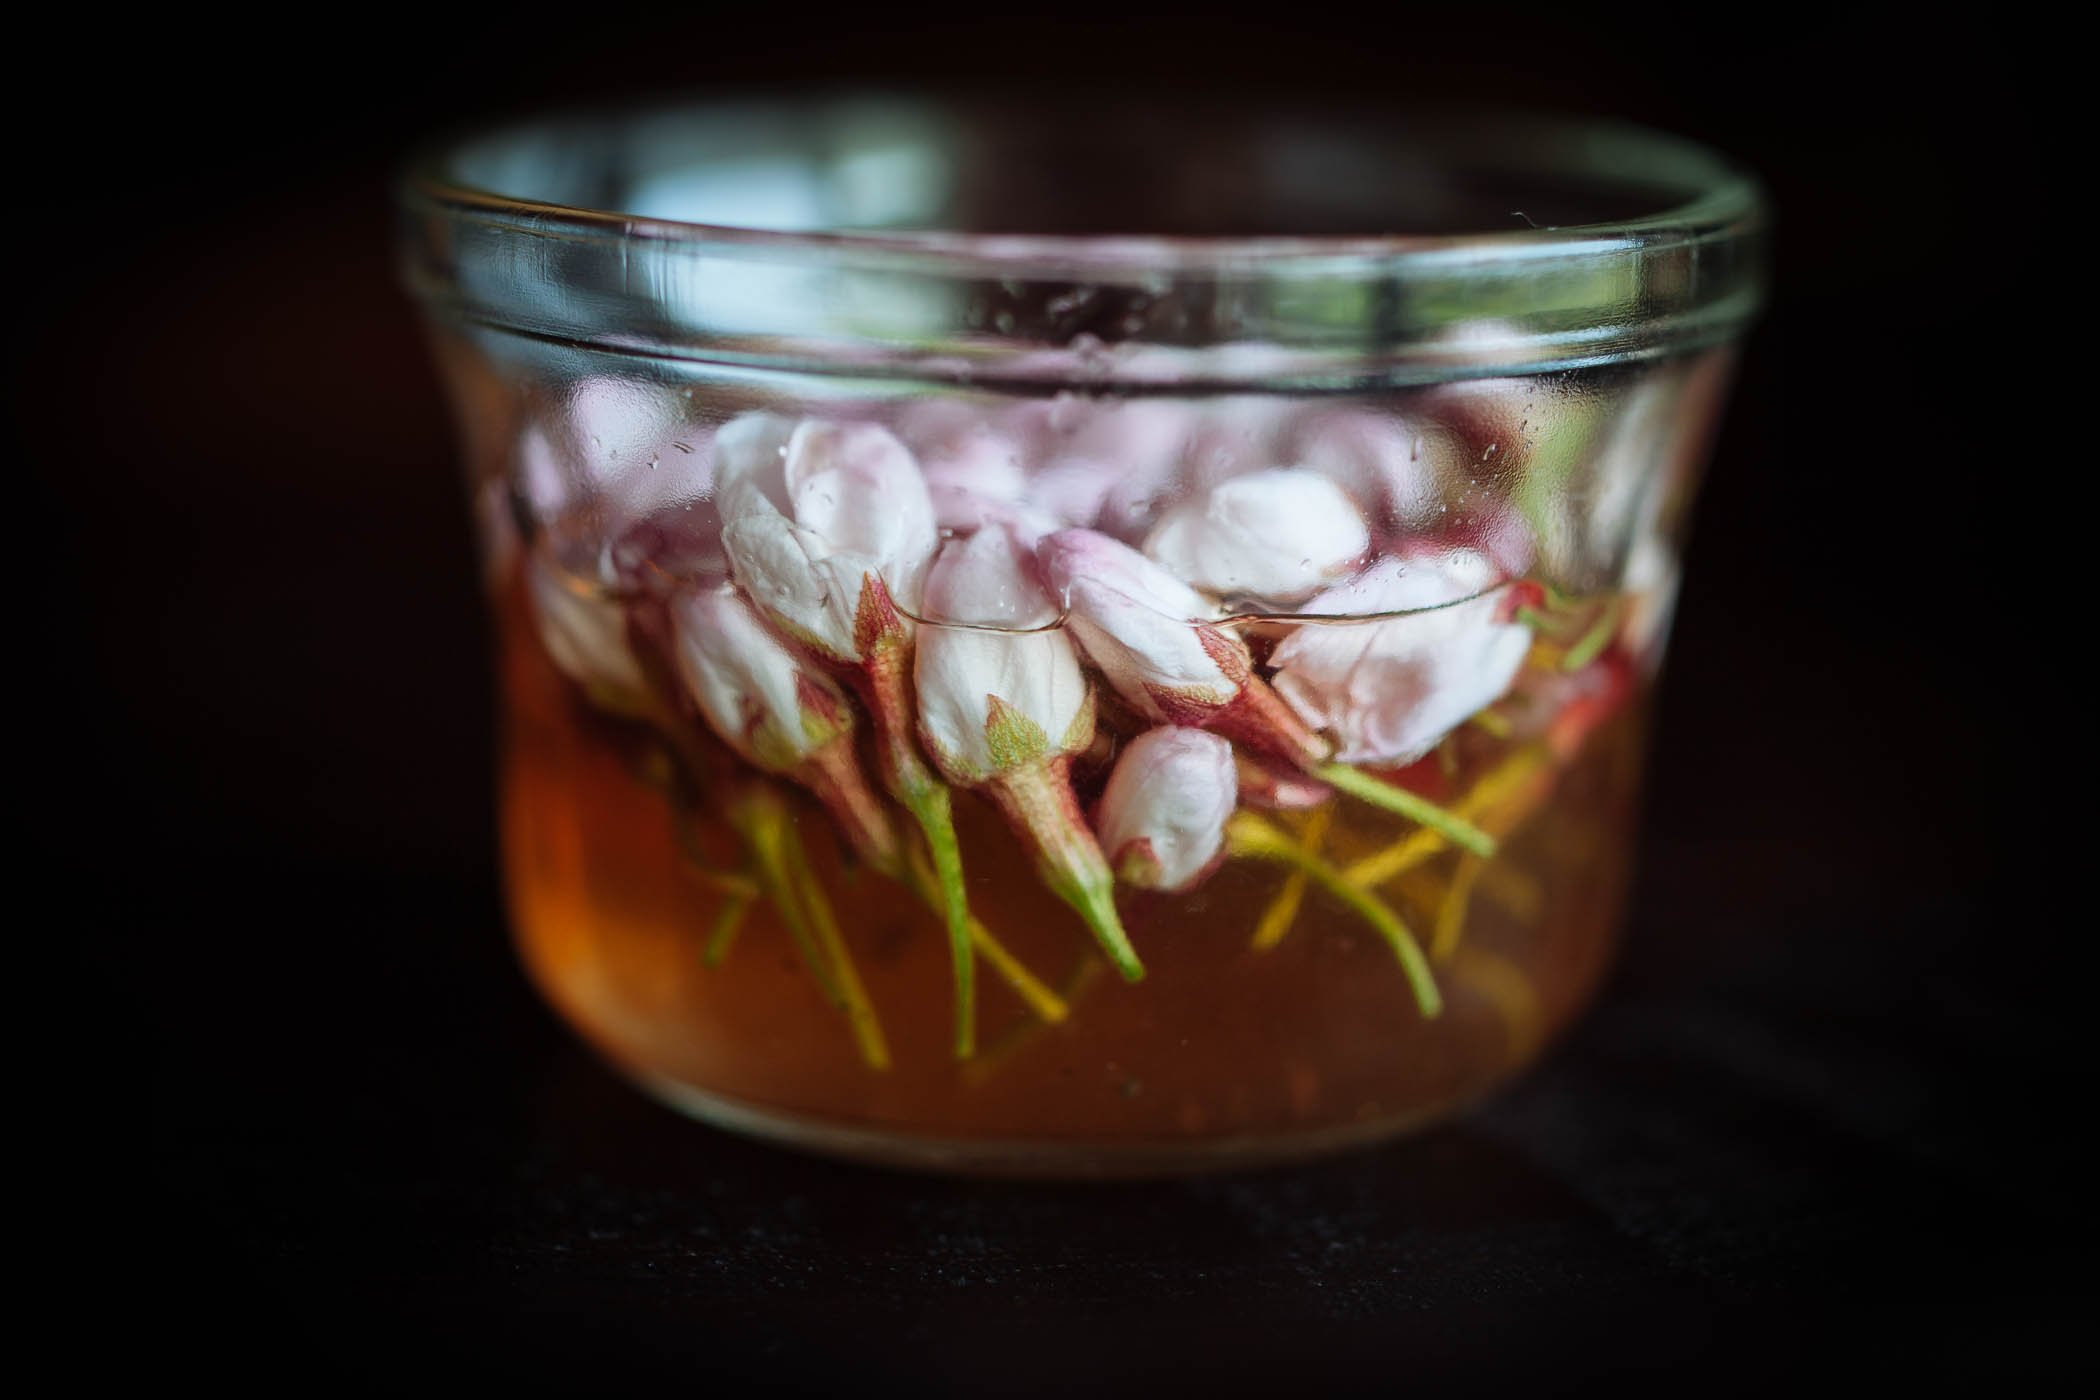 Preserved cherry blossoms as garnish